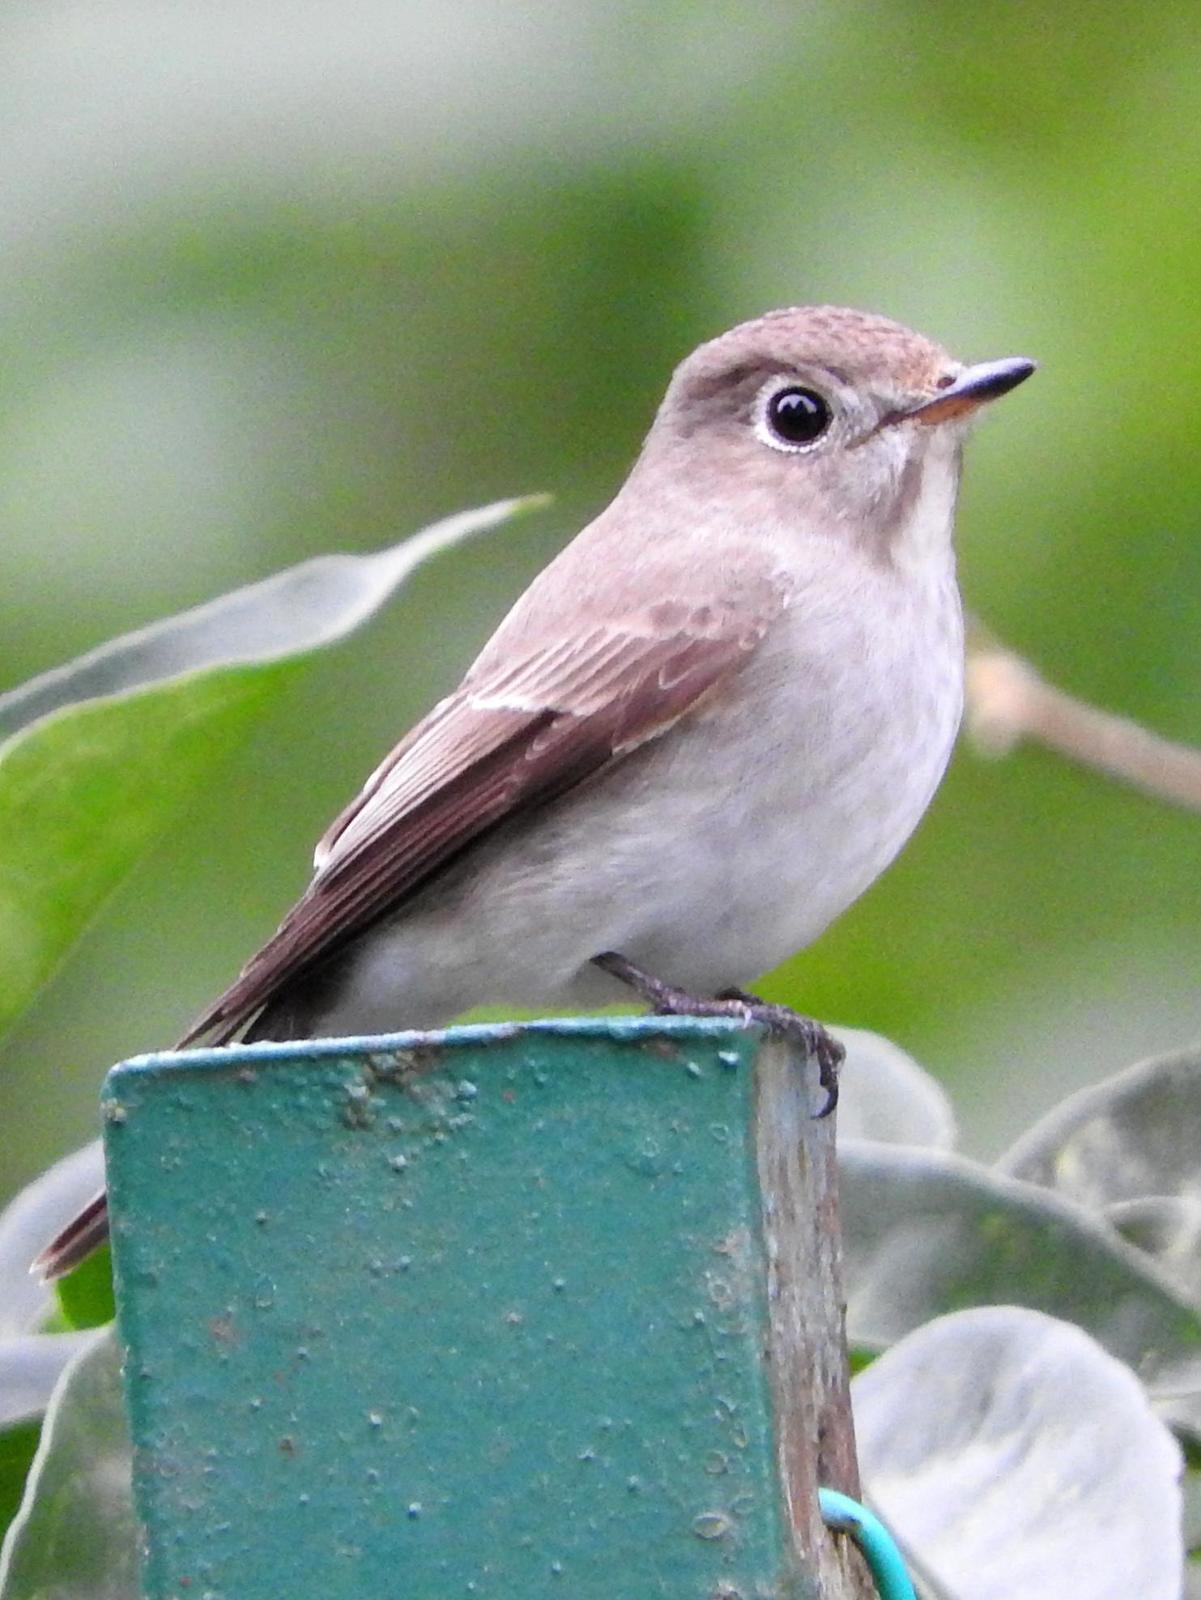 Asian Brown Flycatcher Photo by Todd A. Watkins